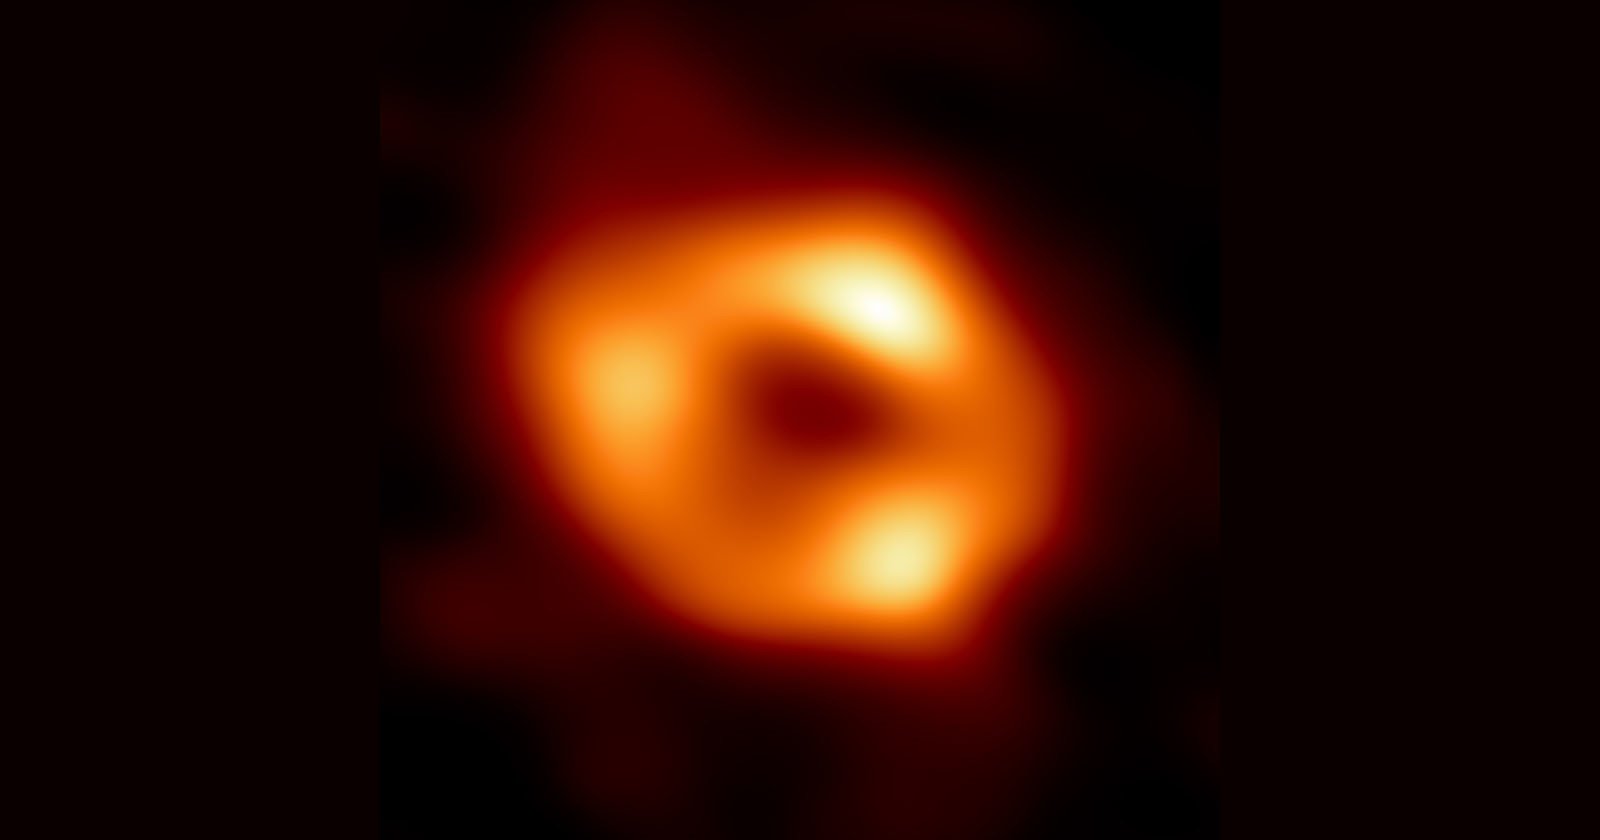 Astronomers Capture First Image of Black Hole at Center of the Milky Way